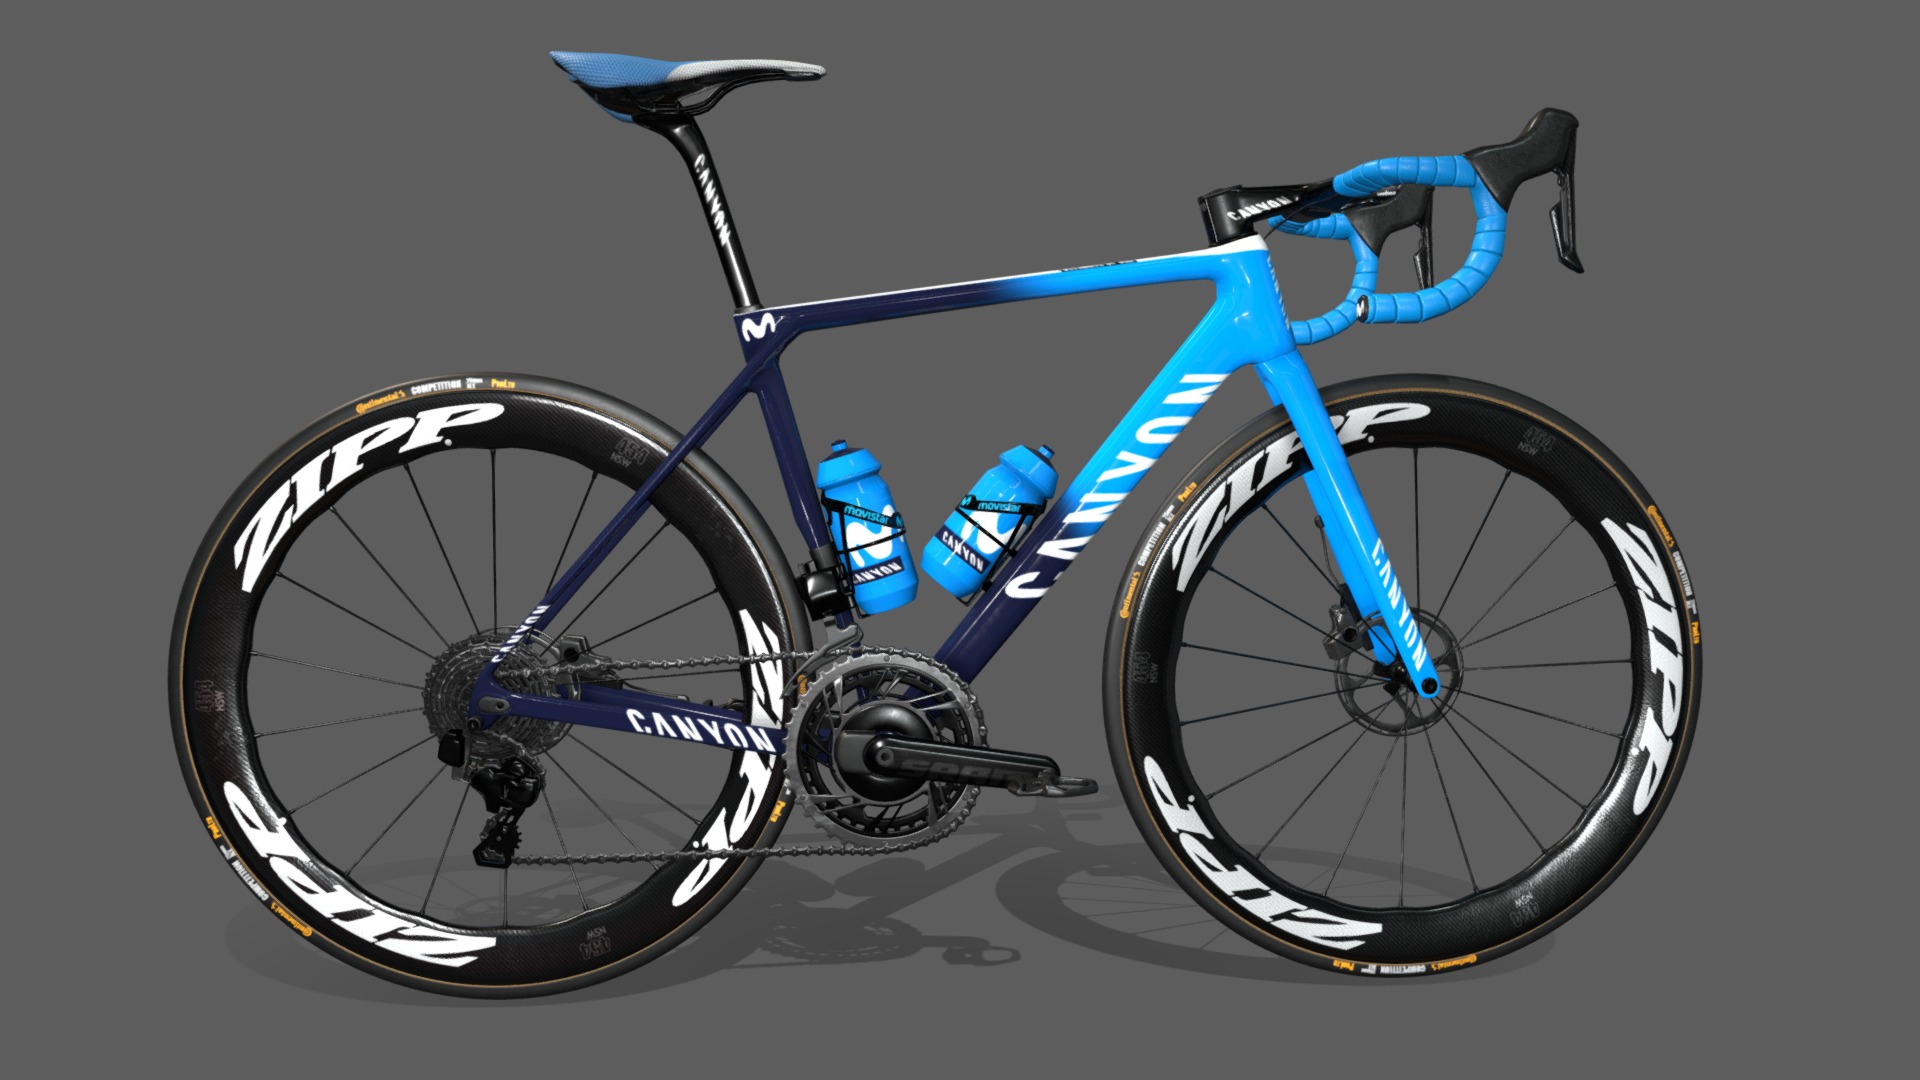 3D model Roadbike Canyon Ultimate CF SLX - This is a 3D model of the Roadbike Canyon Ultimate CF SLX. The 3D model is about a blue bicycle with a blue handlebars.